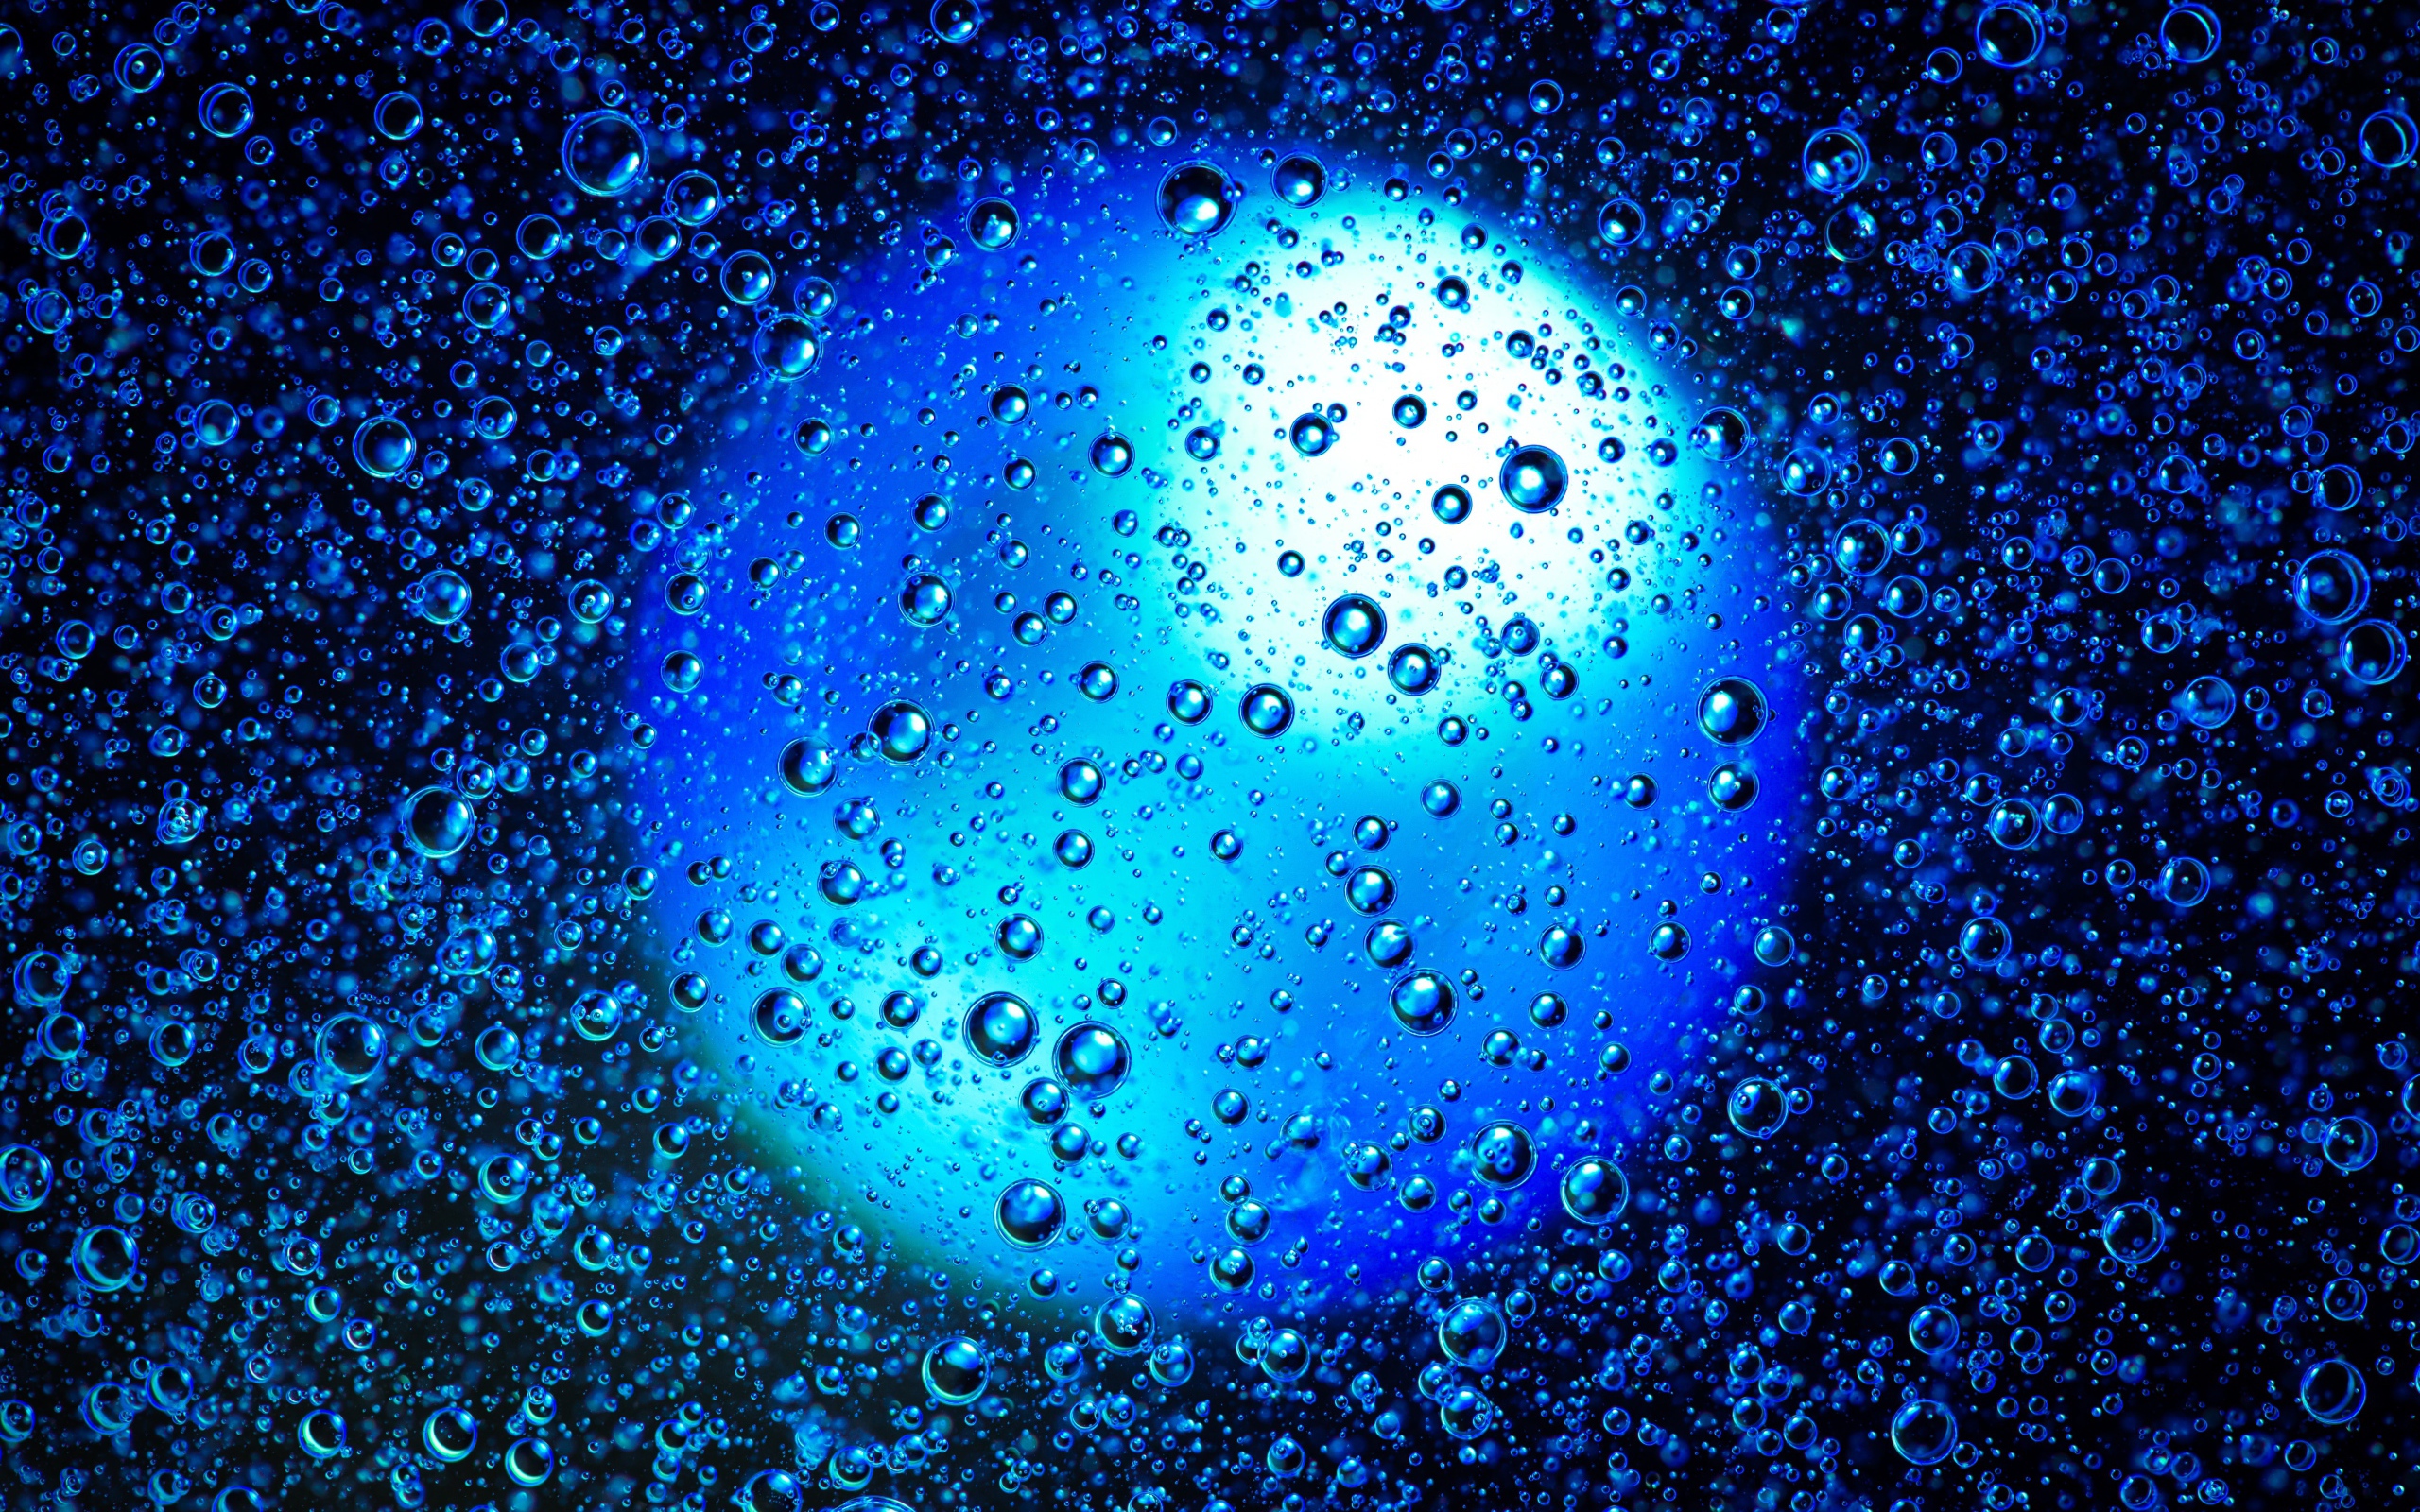 Blue ball in water with bubbles